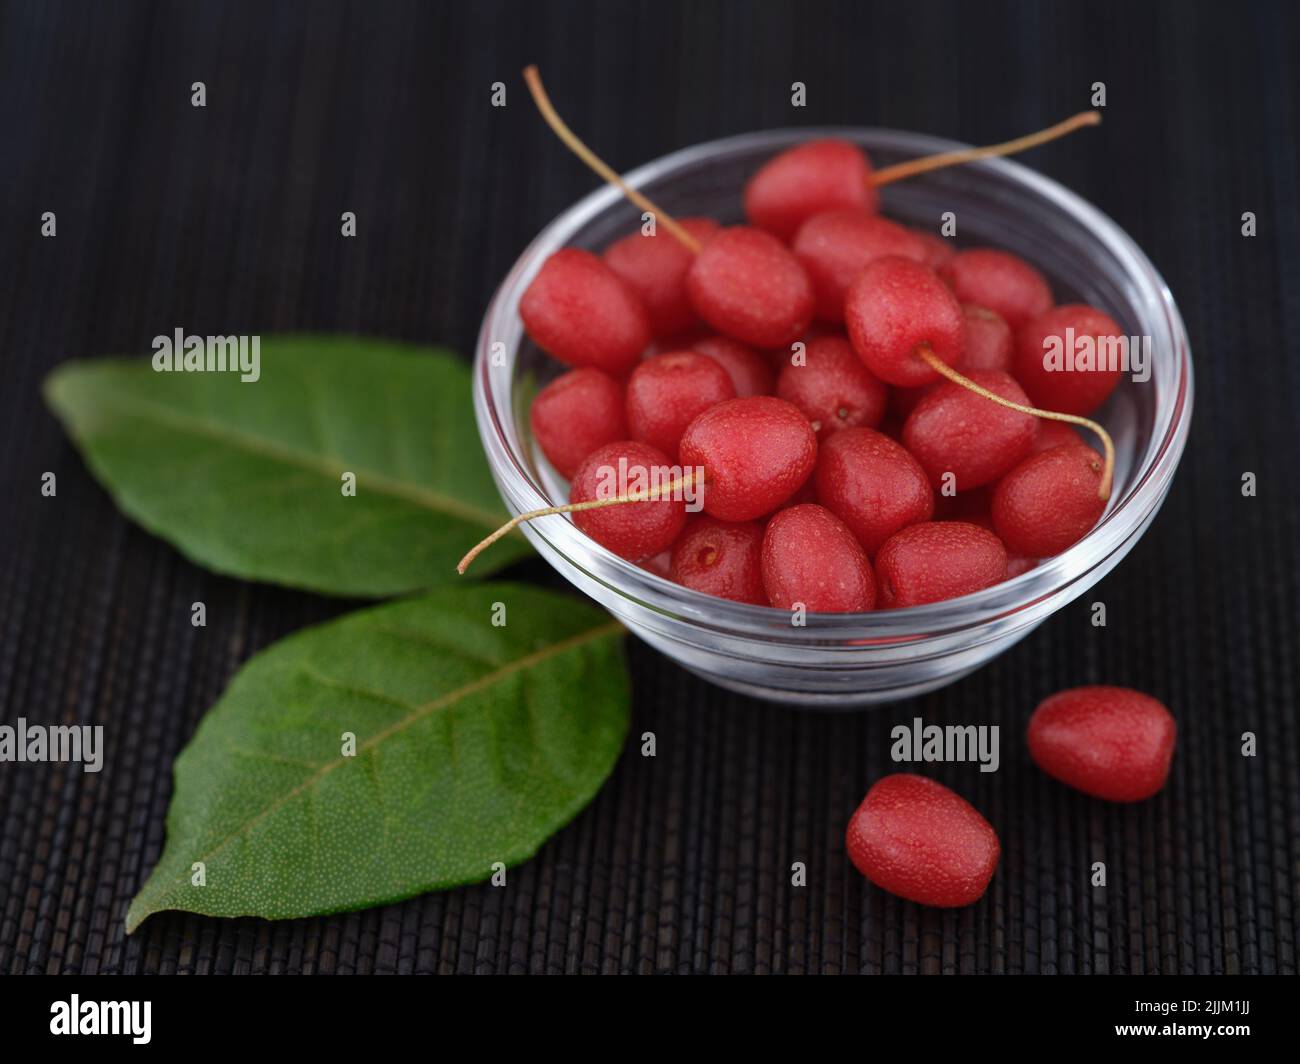 Silverberries (elaeagnus or oleaster) in a glass bowl. Low key. Close up. Stock Photo